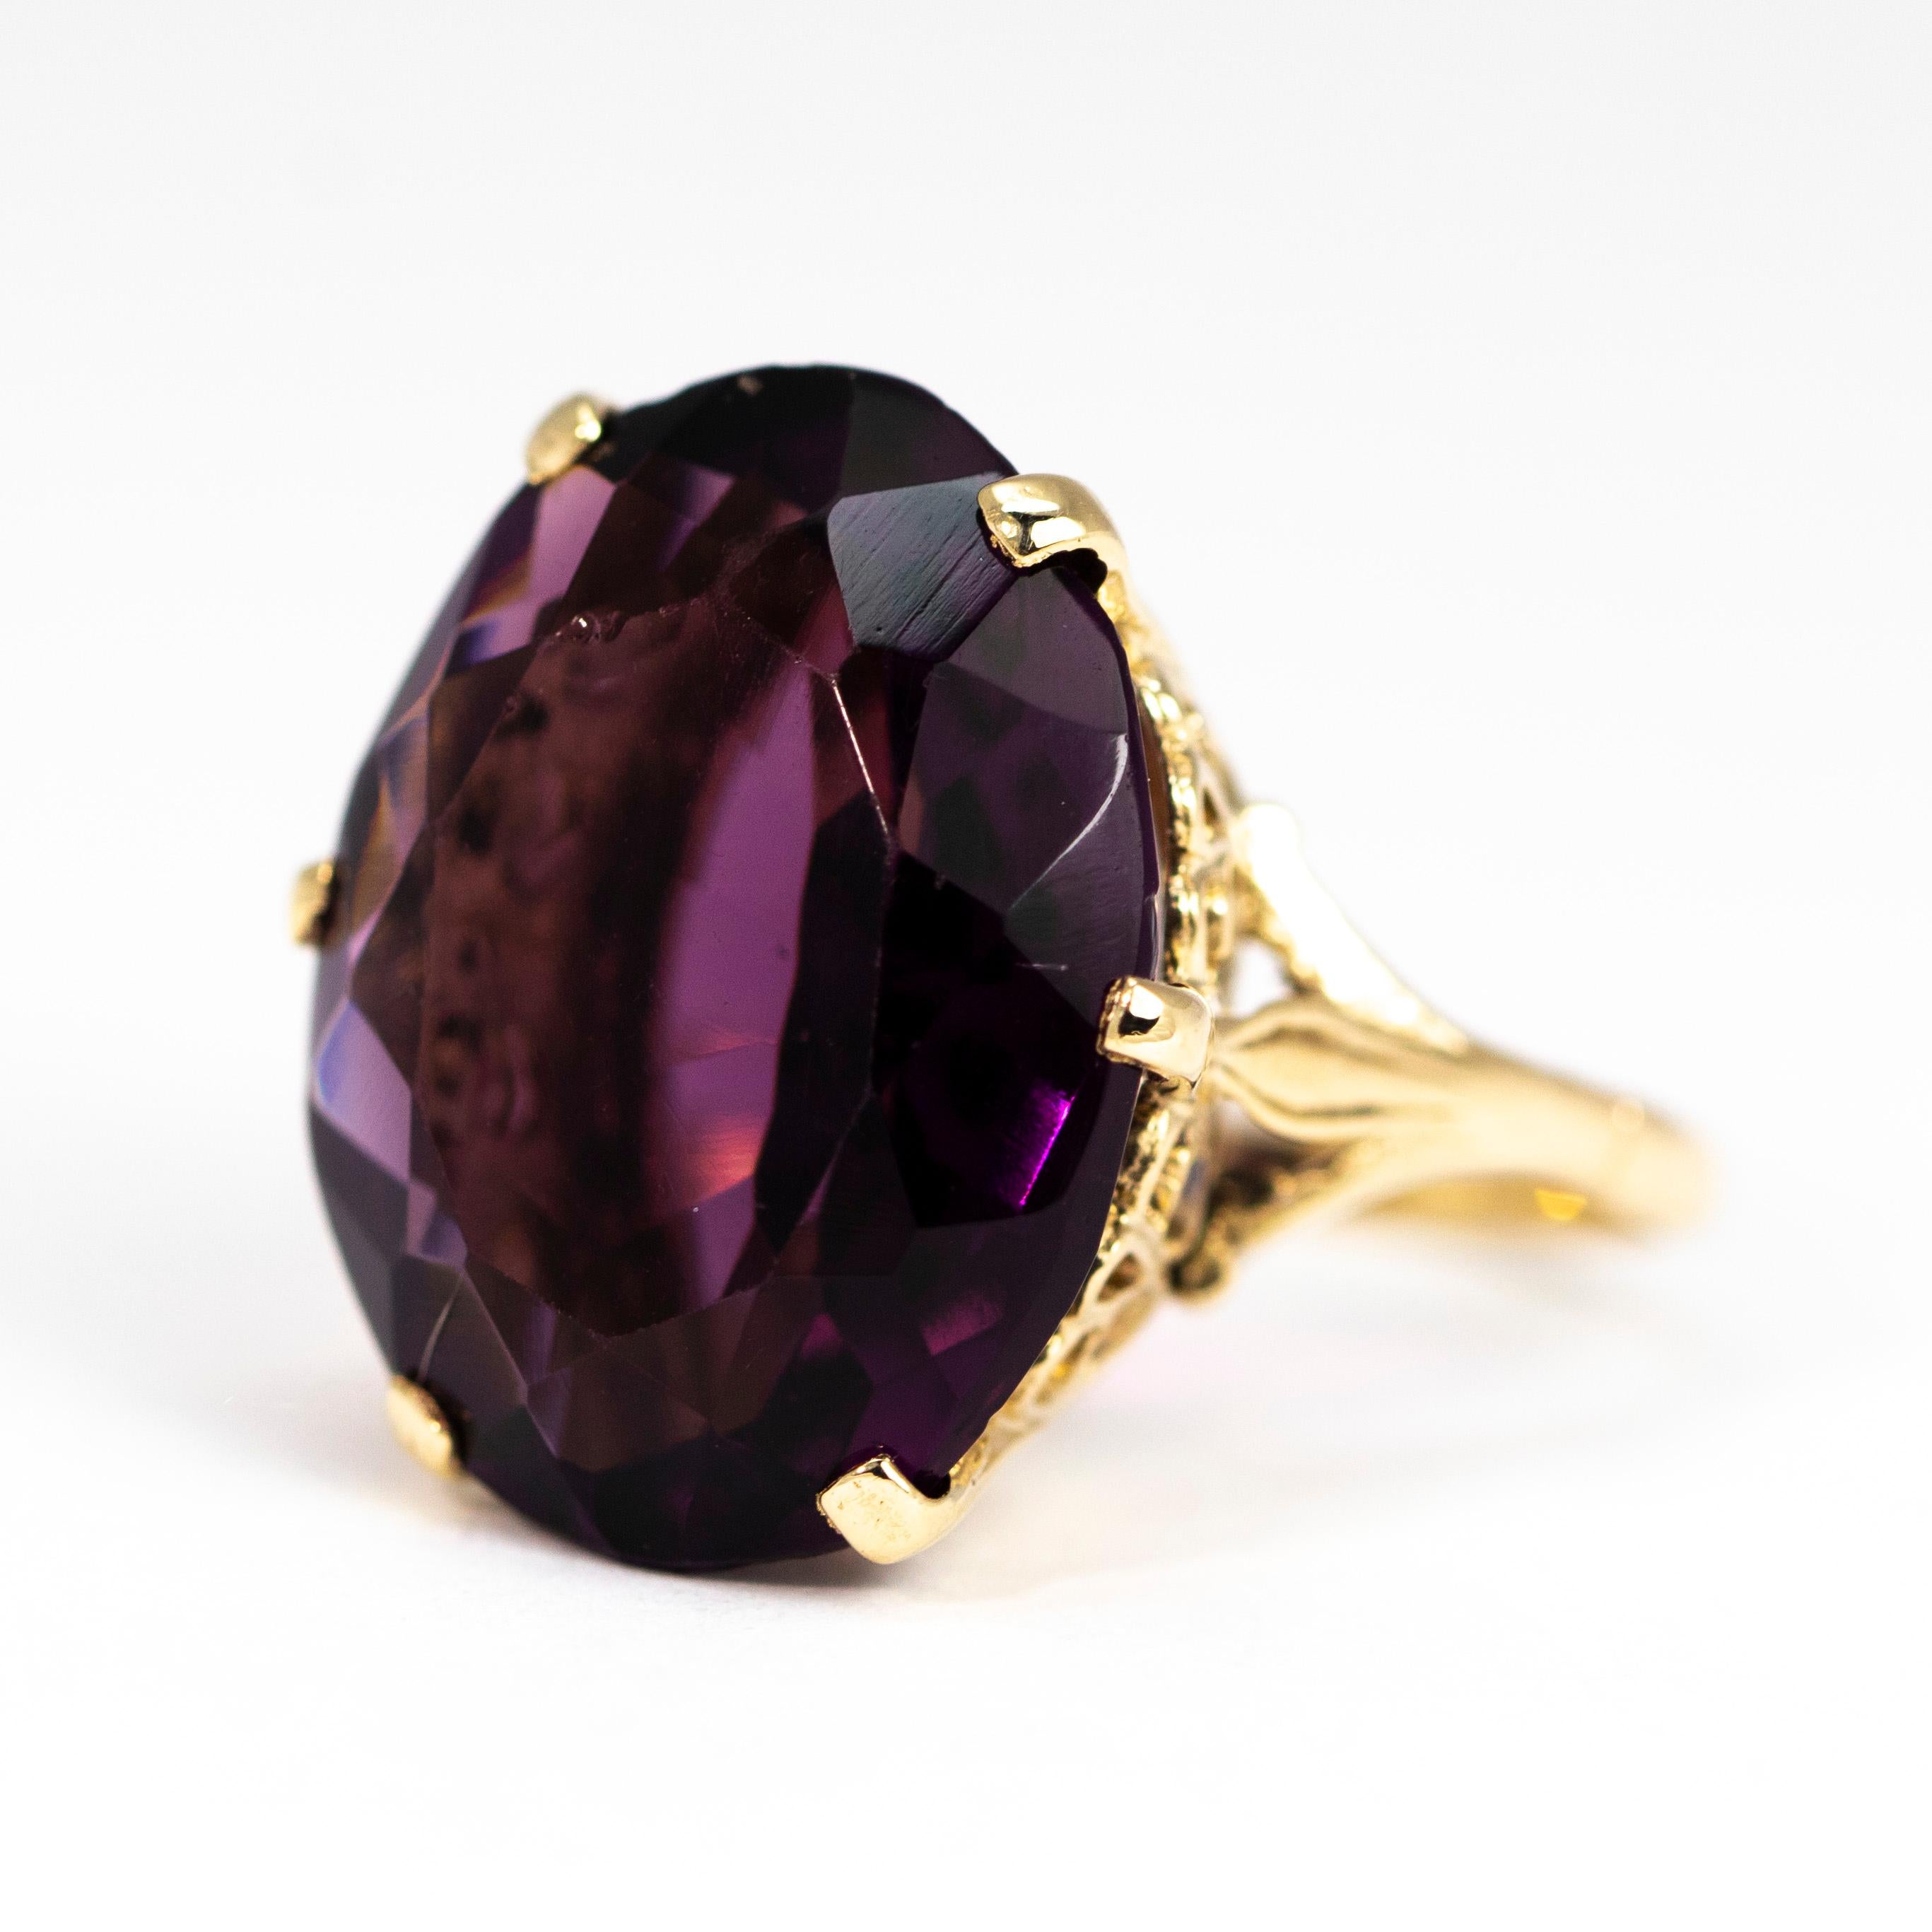 The stunning sone in this ring is a bright purple colour and reflects the light in a wonderful way as you can see in the pictures. The stone is held with a simple claw setting and a very ornate setting. 

Ring Size: L 1/2 or 6 
Stone Dimensions: 20